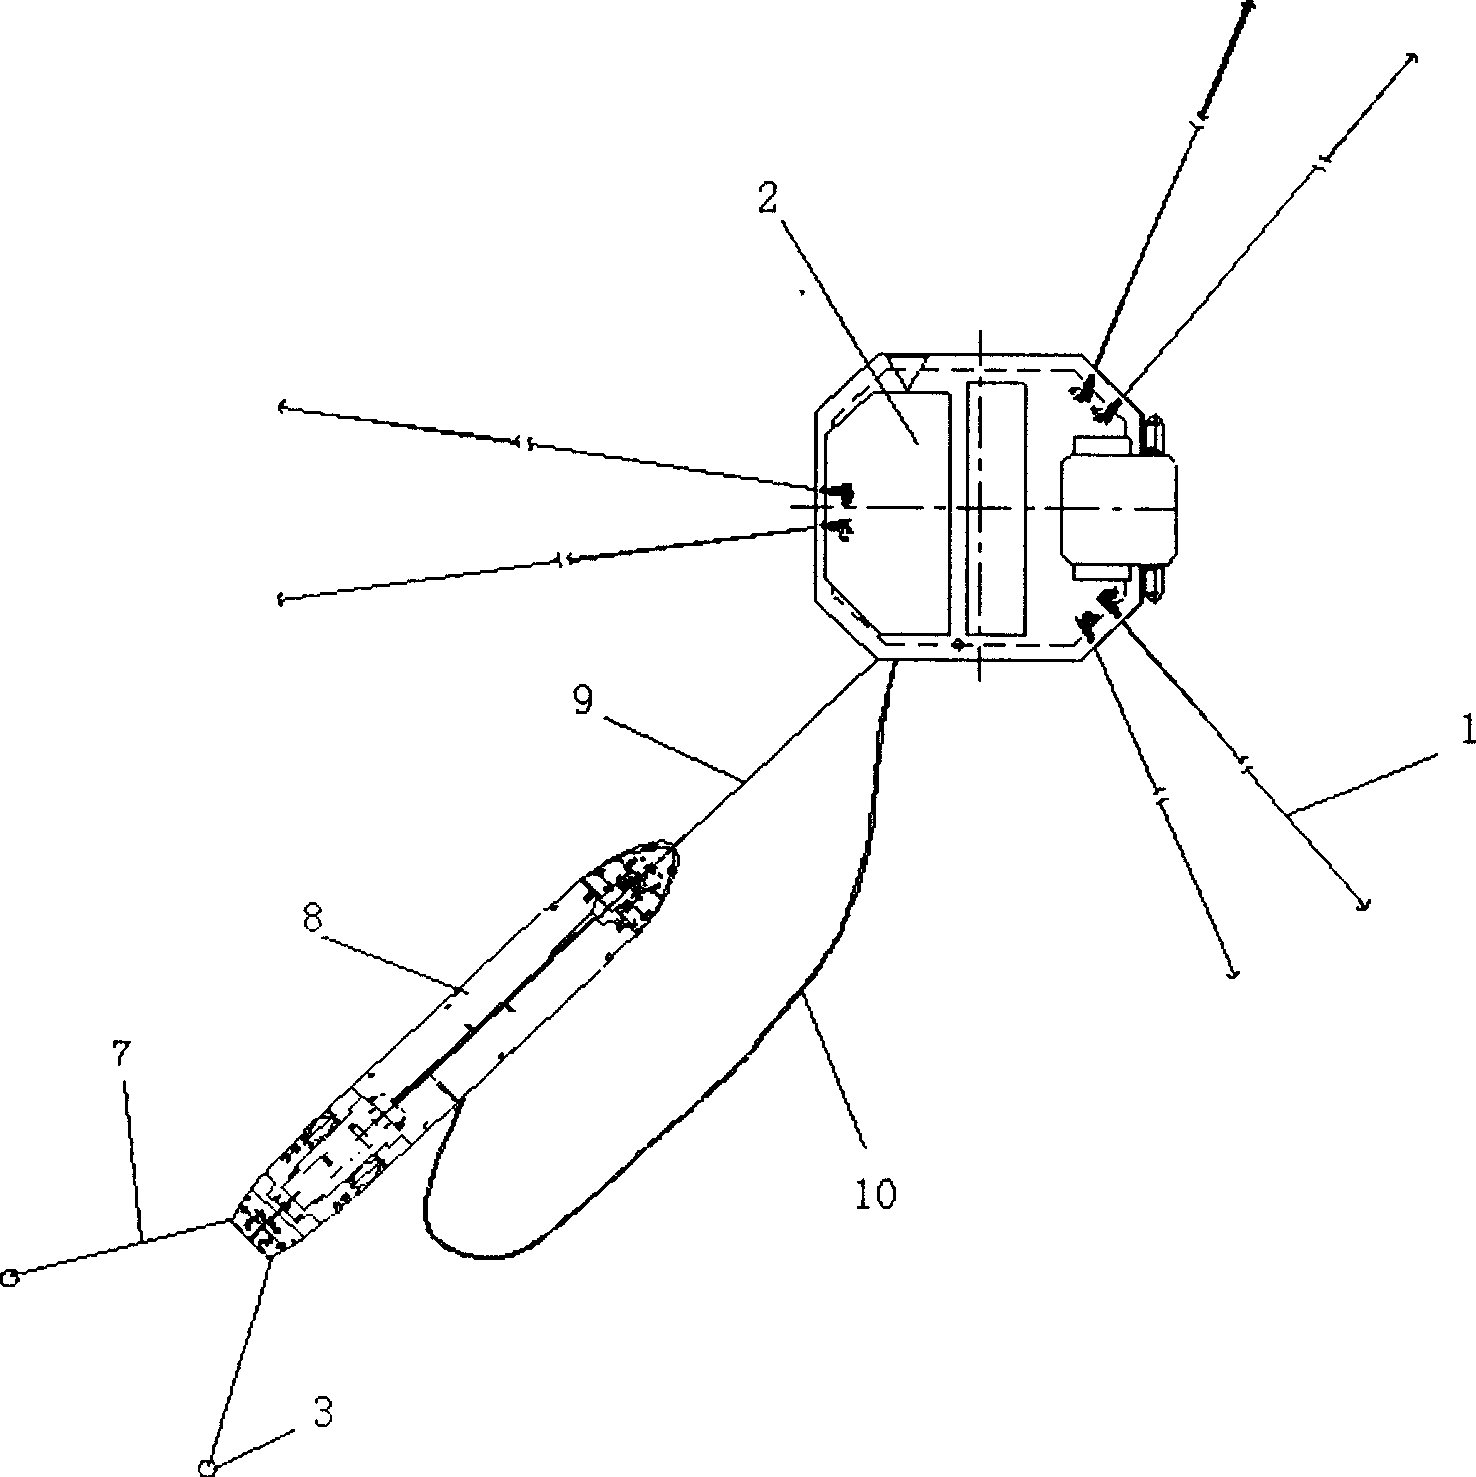 Flexible connection berthing method and apparatus for transferring oil on sea